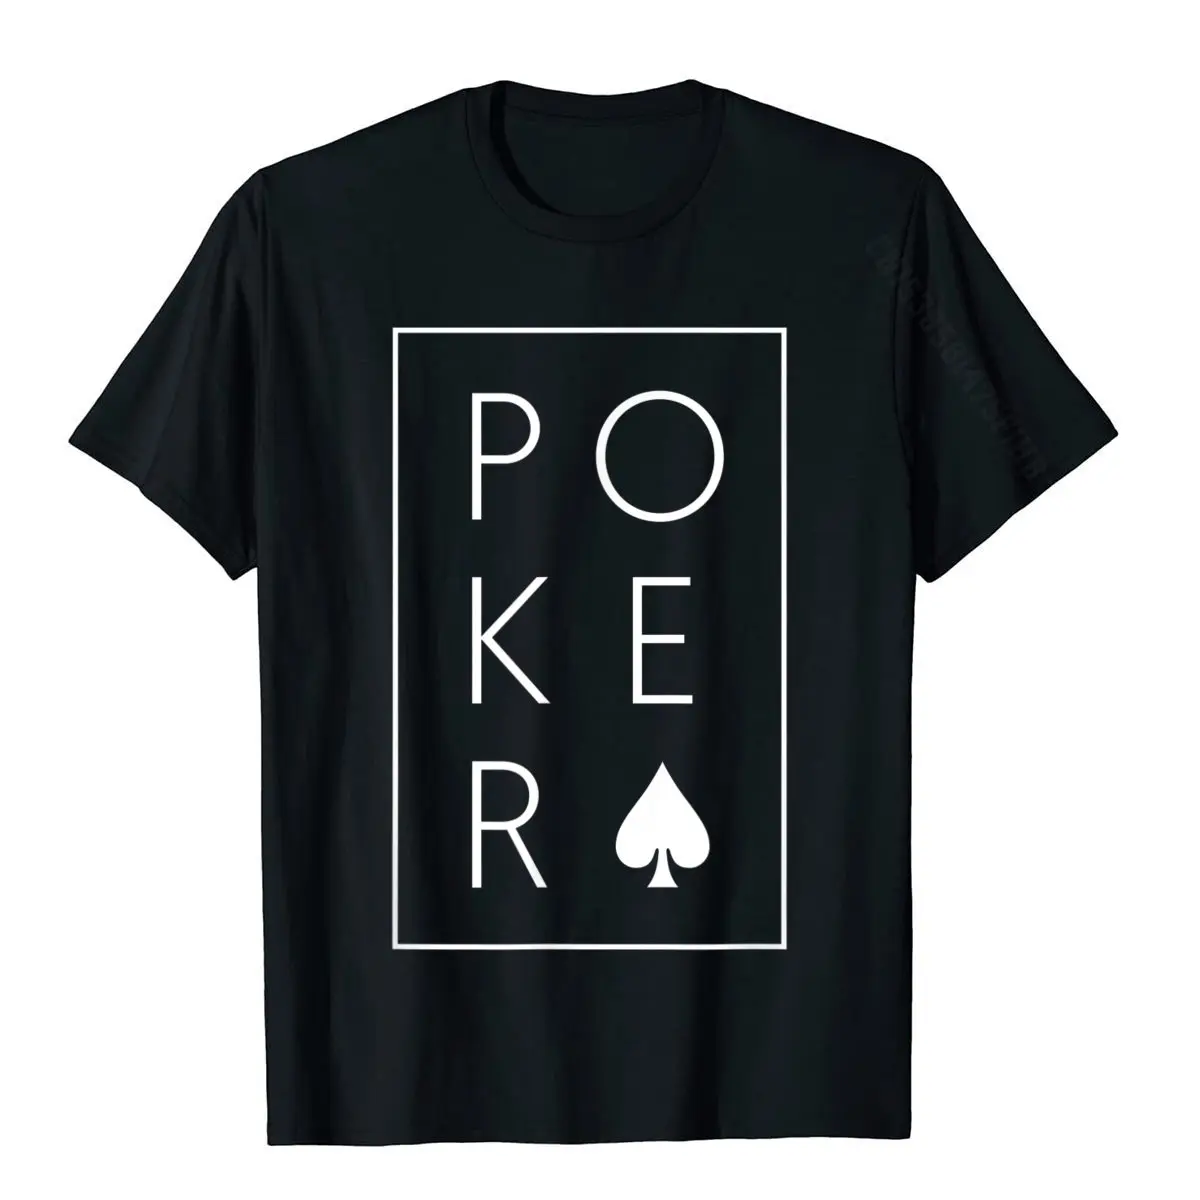 Poker Shirt Classic Spades Texas Hold'em Ace T-Shirt Cotton Tops & Tees For Men Summer Tshirts Printed Graphic